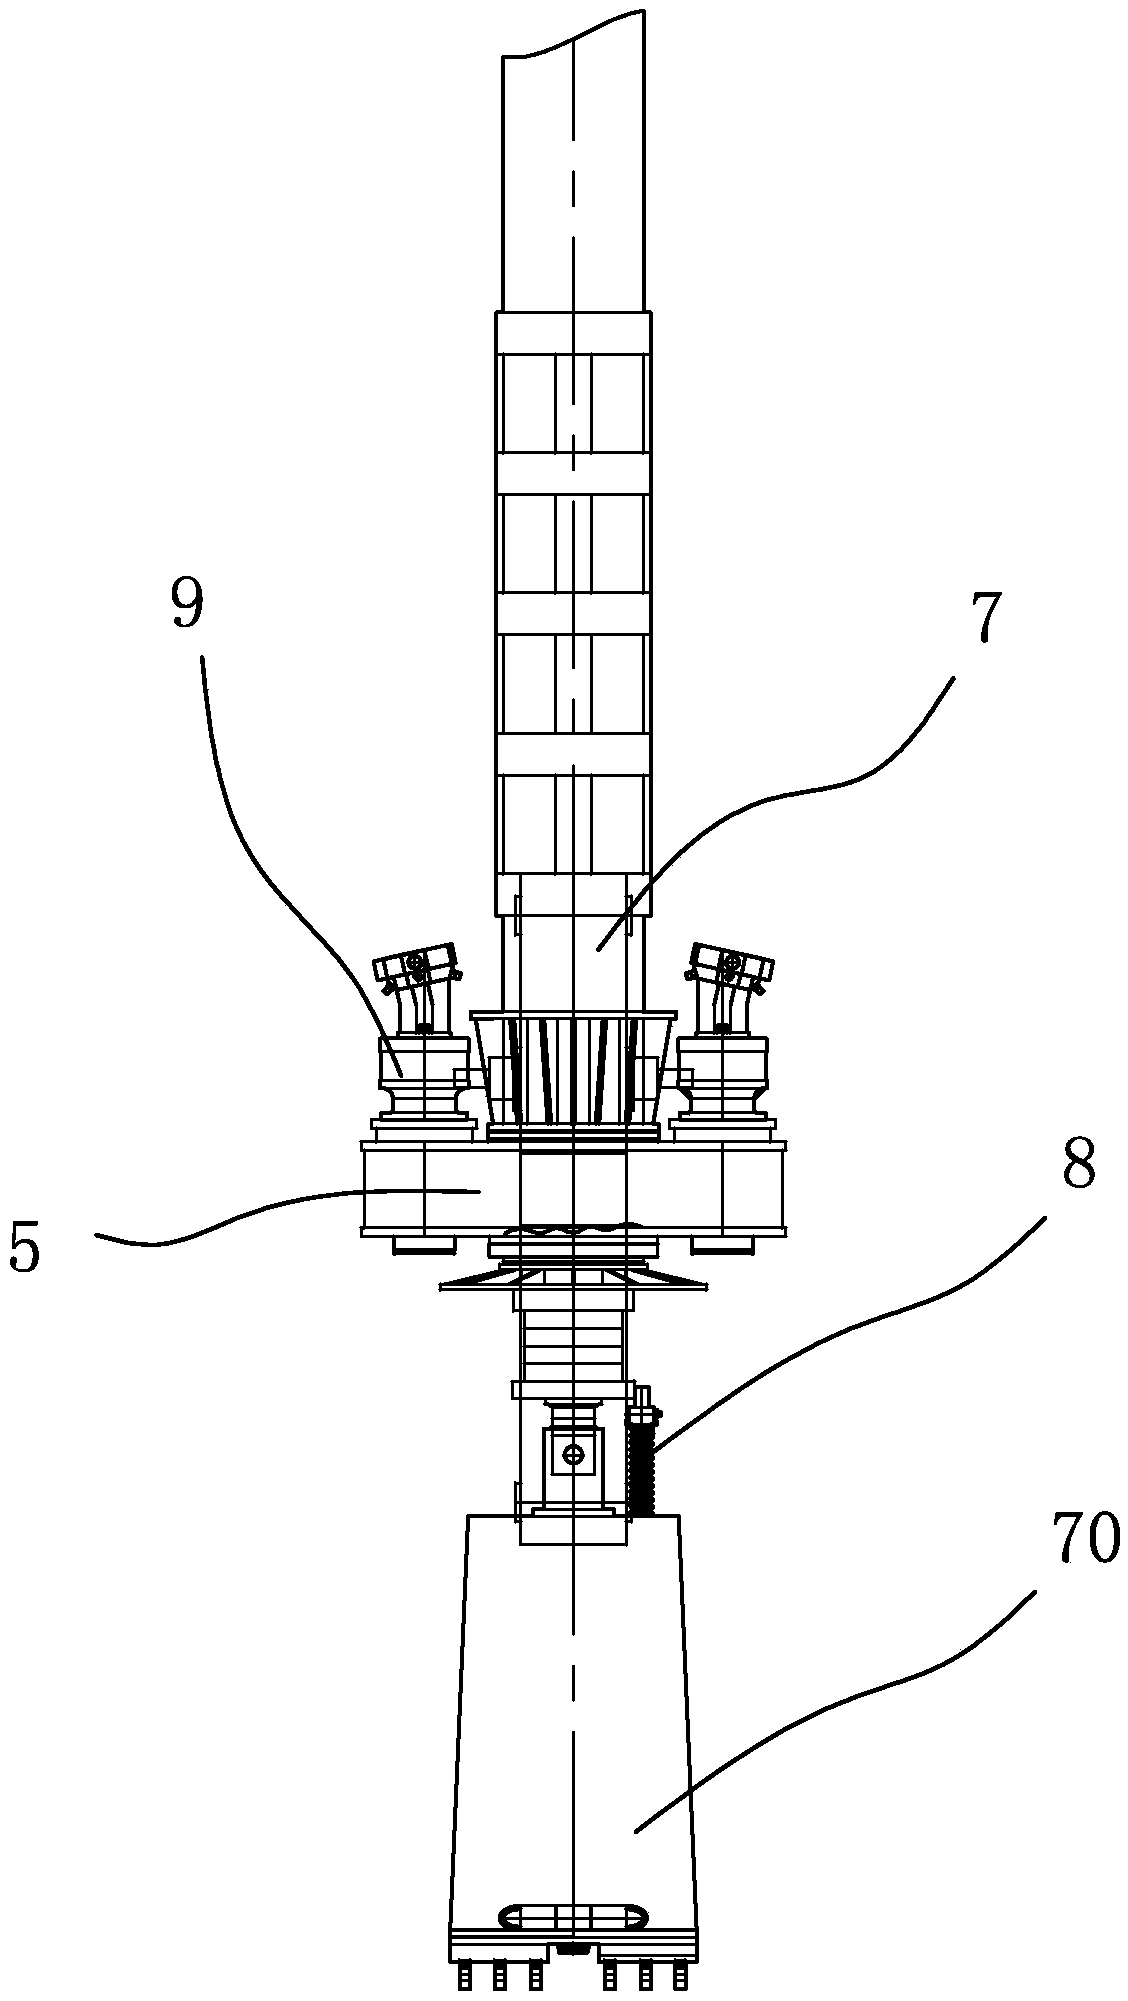 Fluid-driven tunneling device